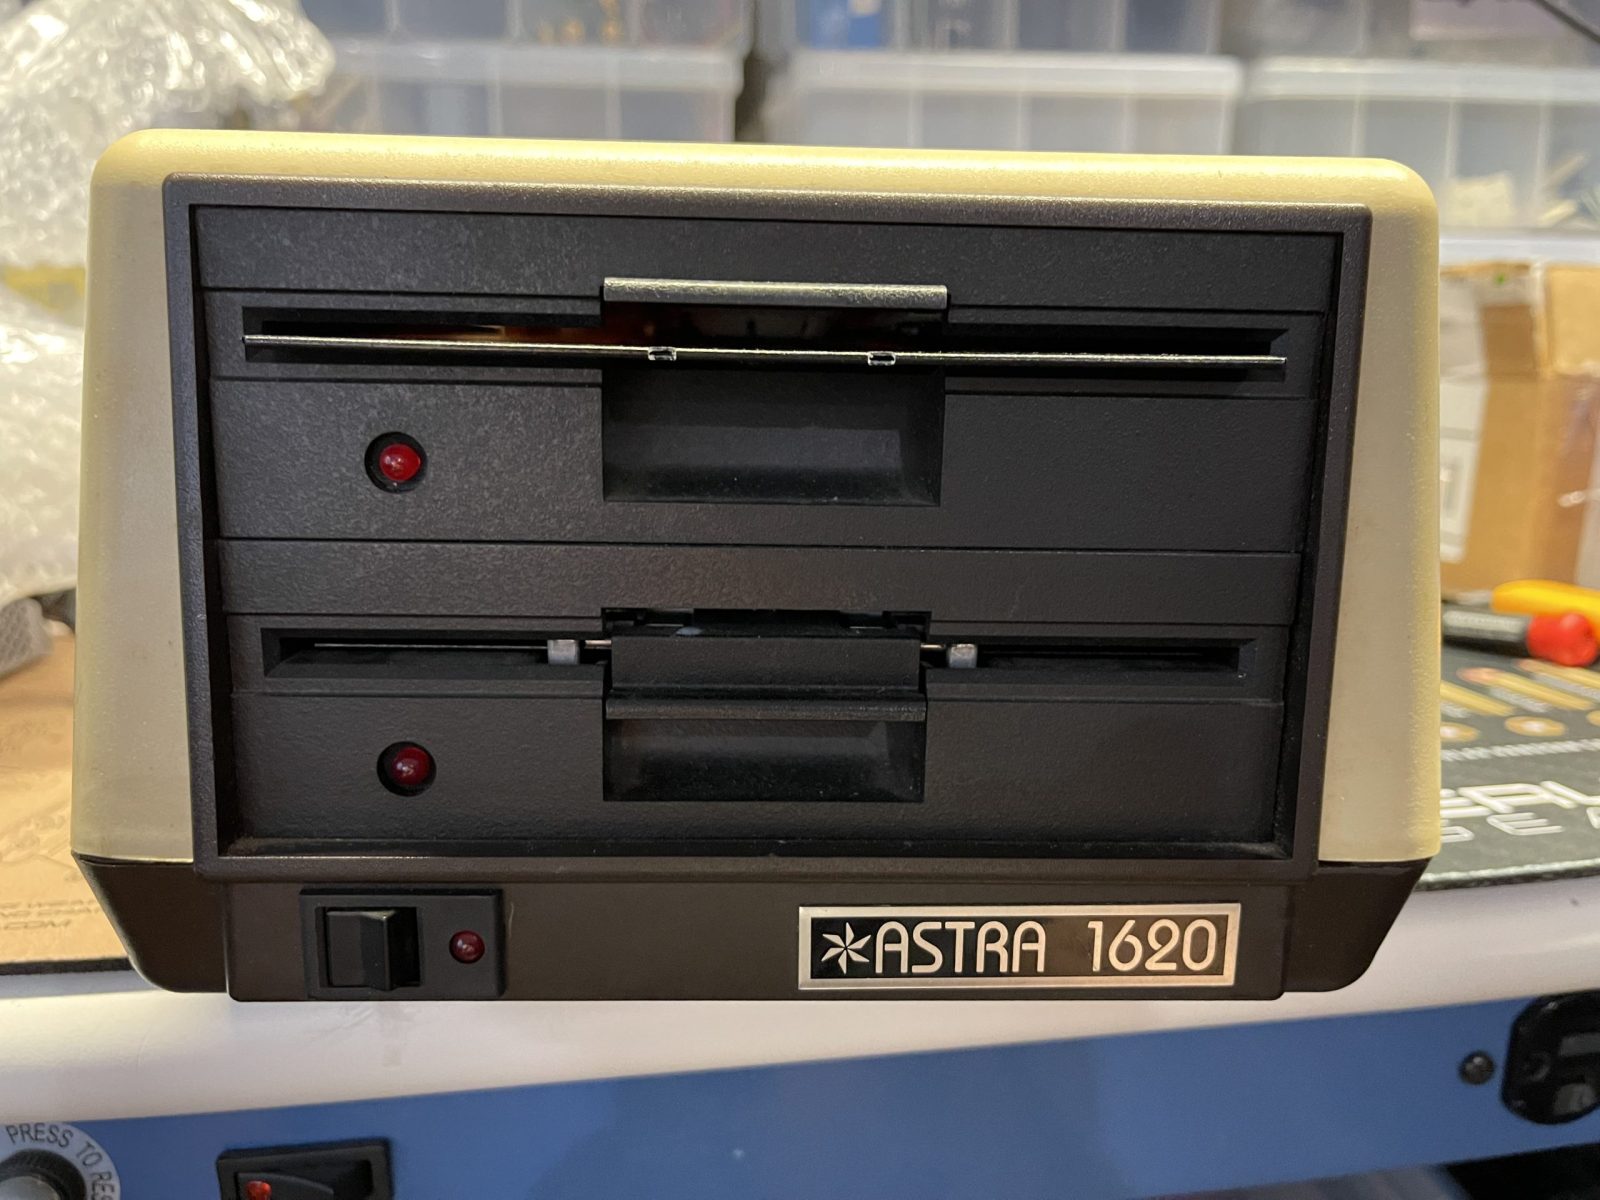 You are currently viewing Welcome the Astra 1620 Dual Floppy Drive